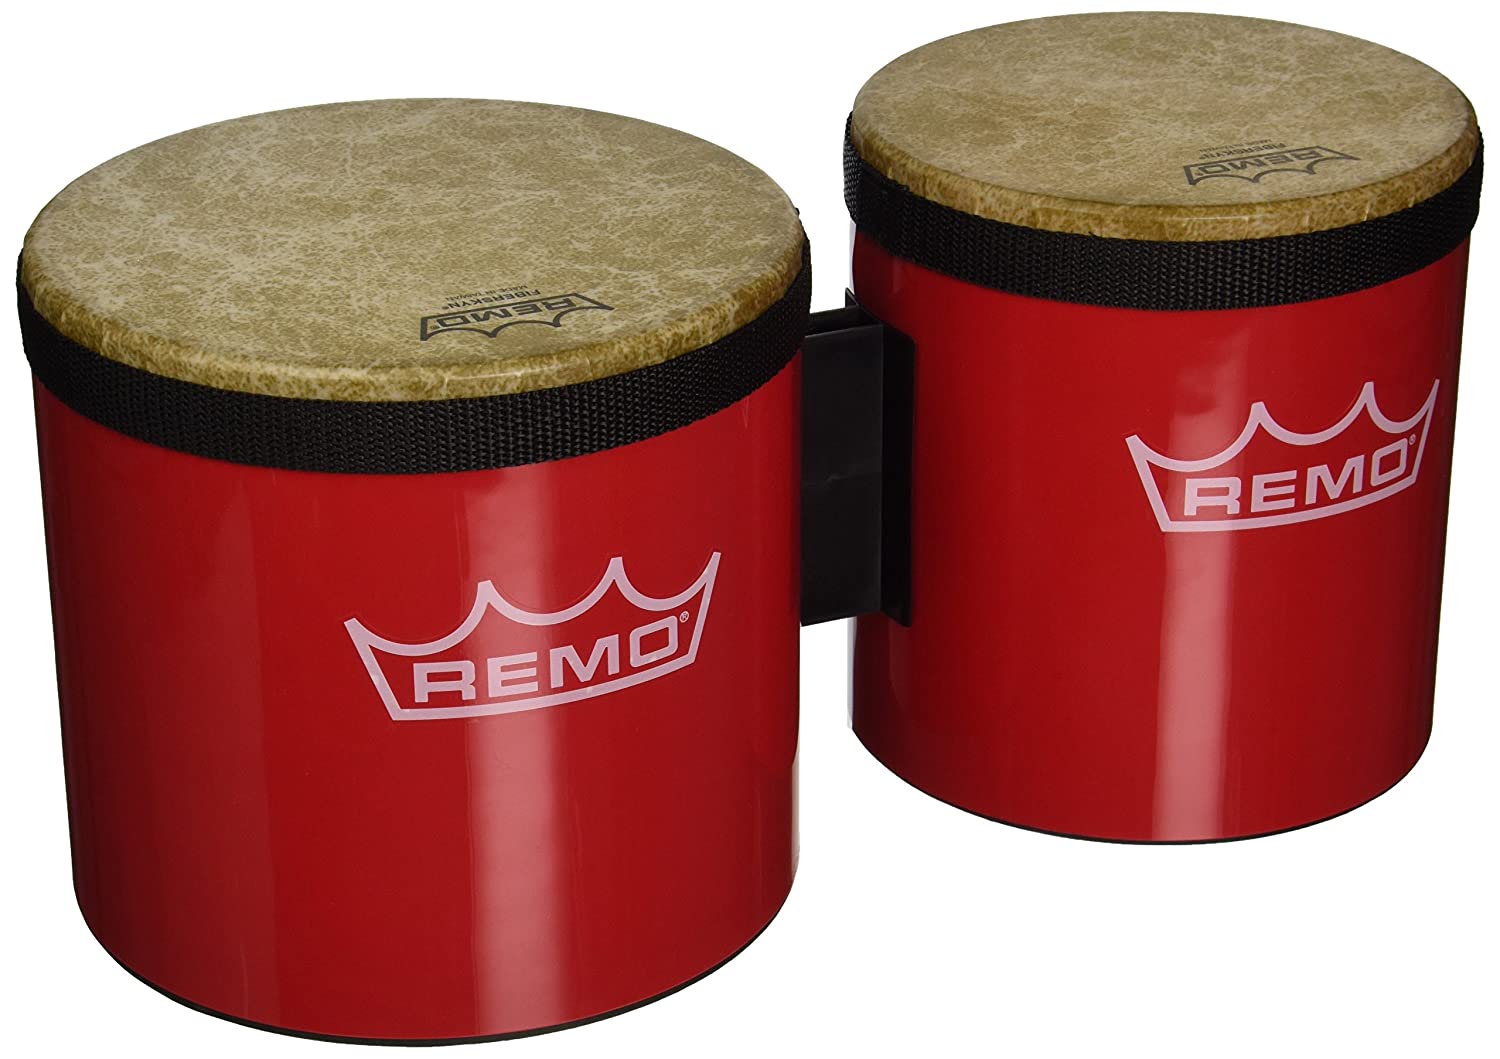 9 Best Bongo Drums for Kids 2022 - Reviews & Buying Guide 4